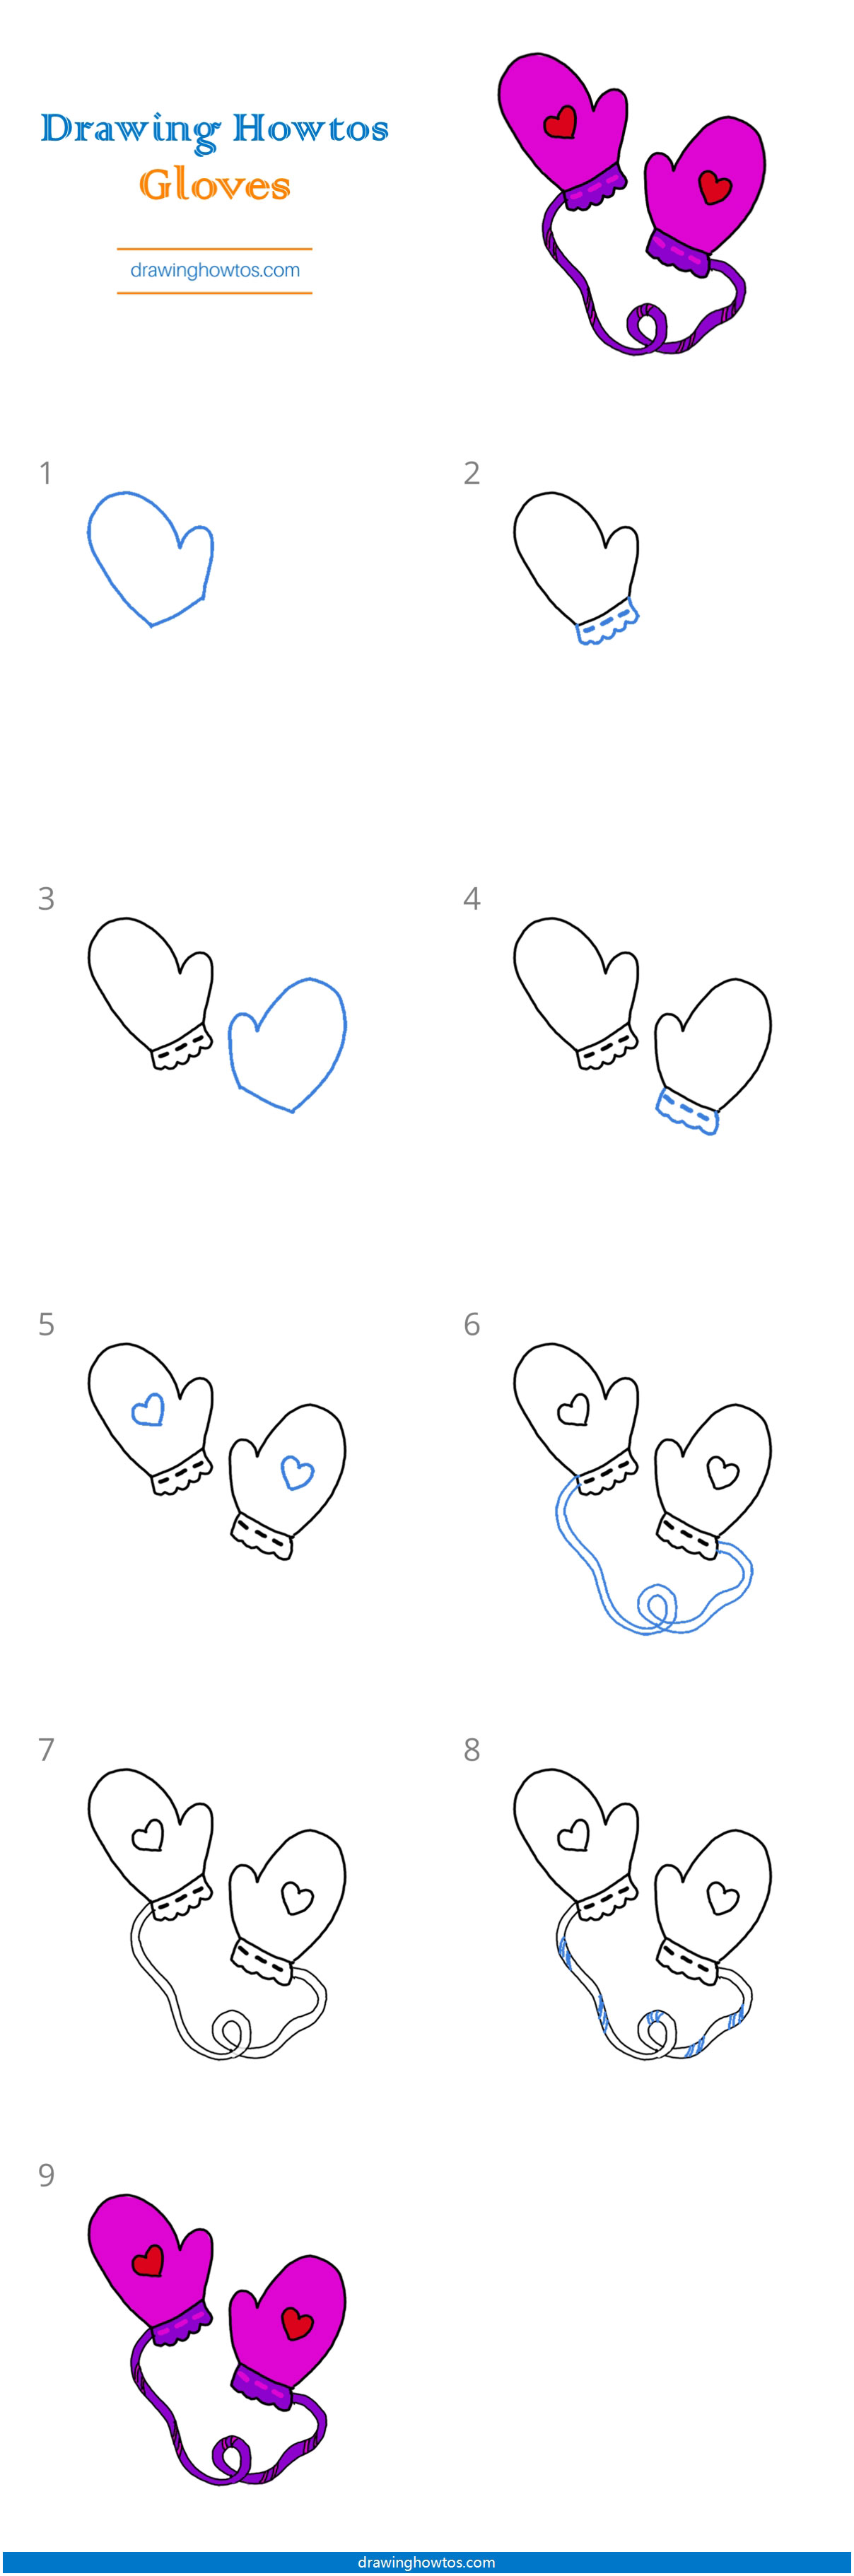 How to Draw Mittens Step by Step